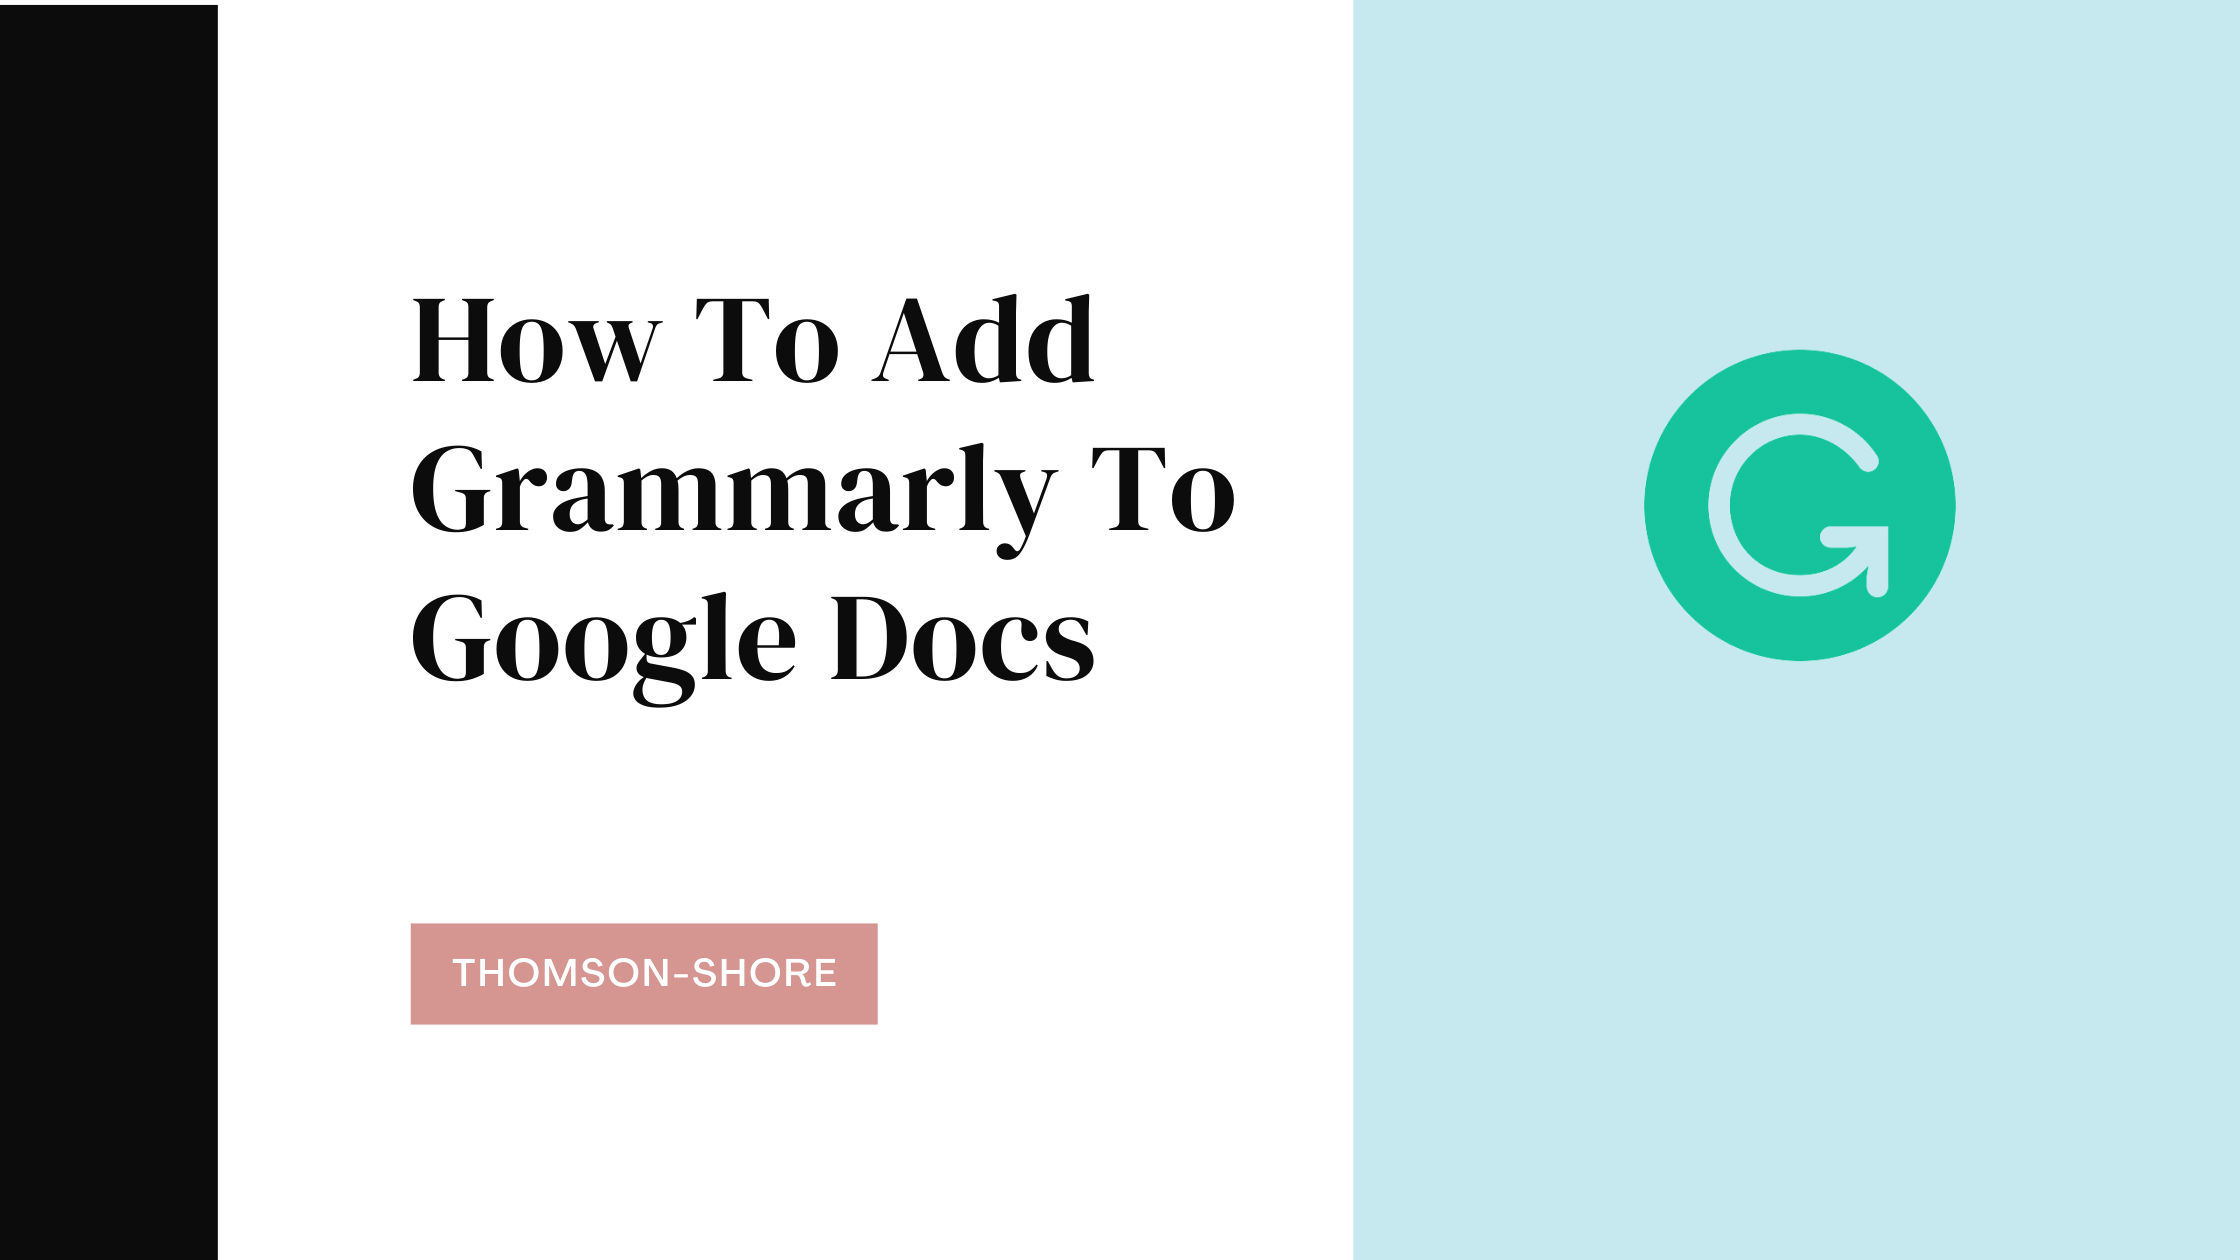 does the free grammarly work on google docs